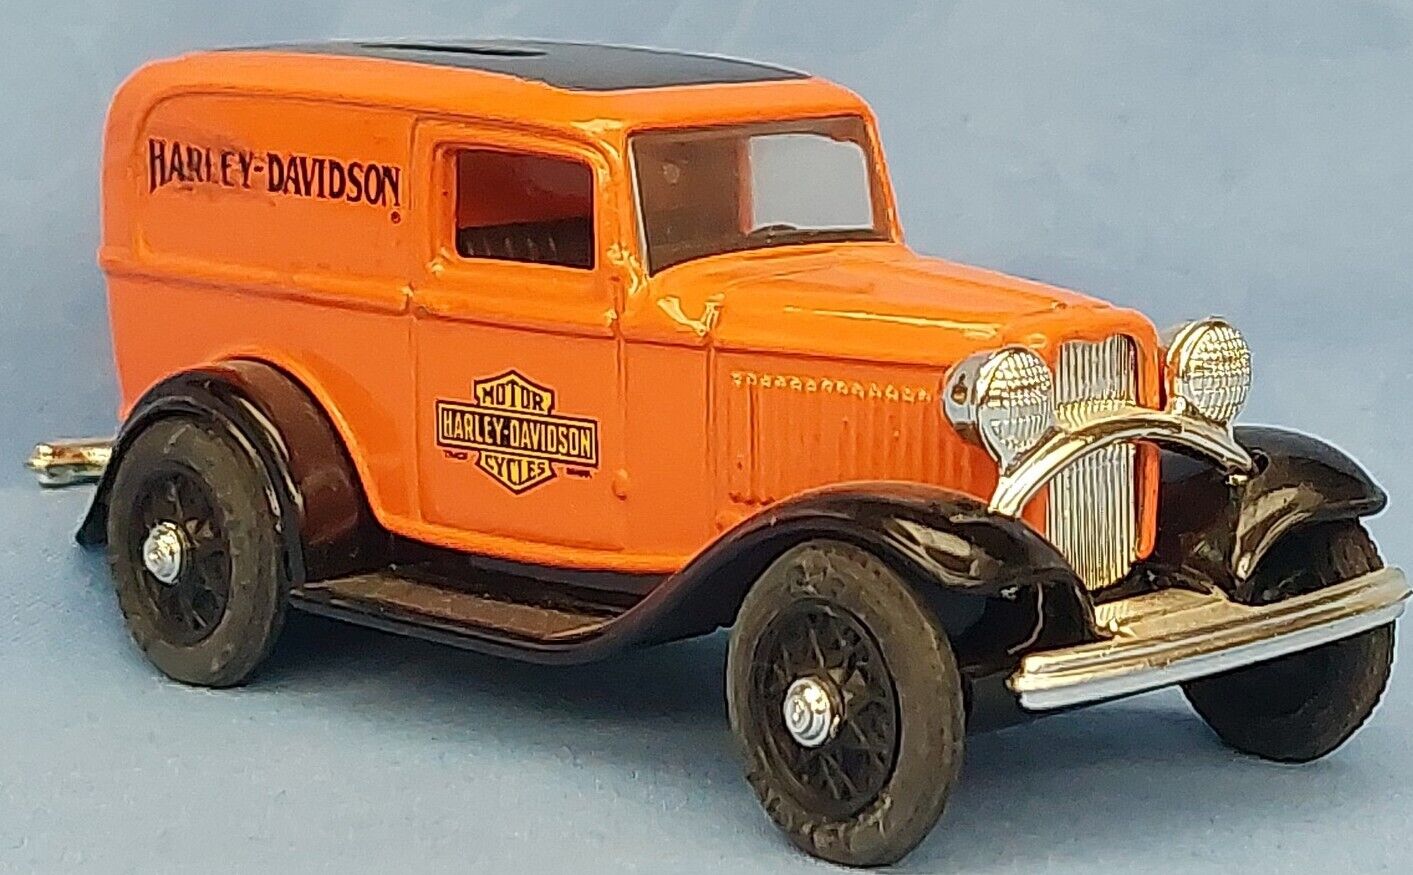 Harley Davidson 1932 Ford Panel Truck Dime Bank 1:43 Scale New In Original Tin